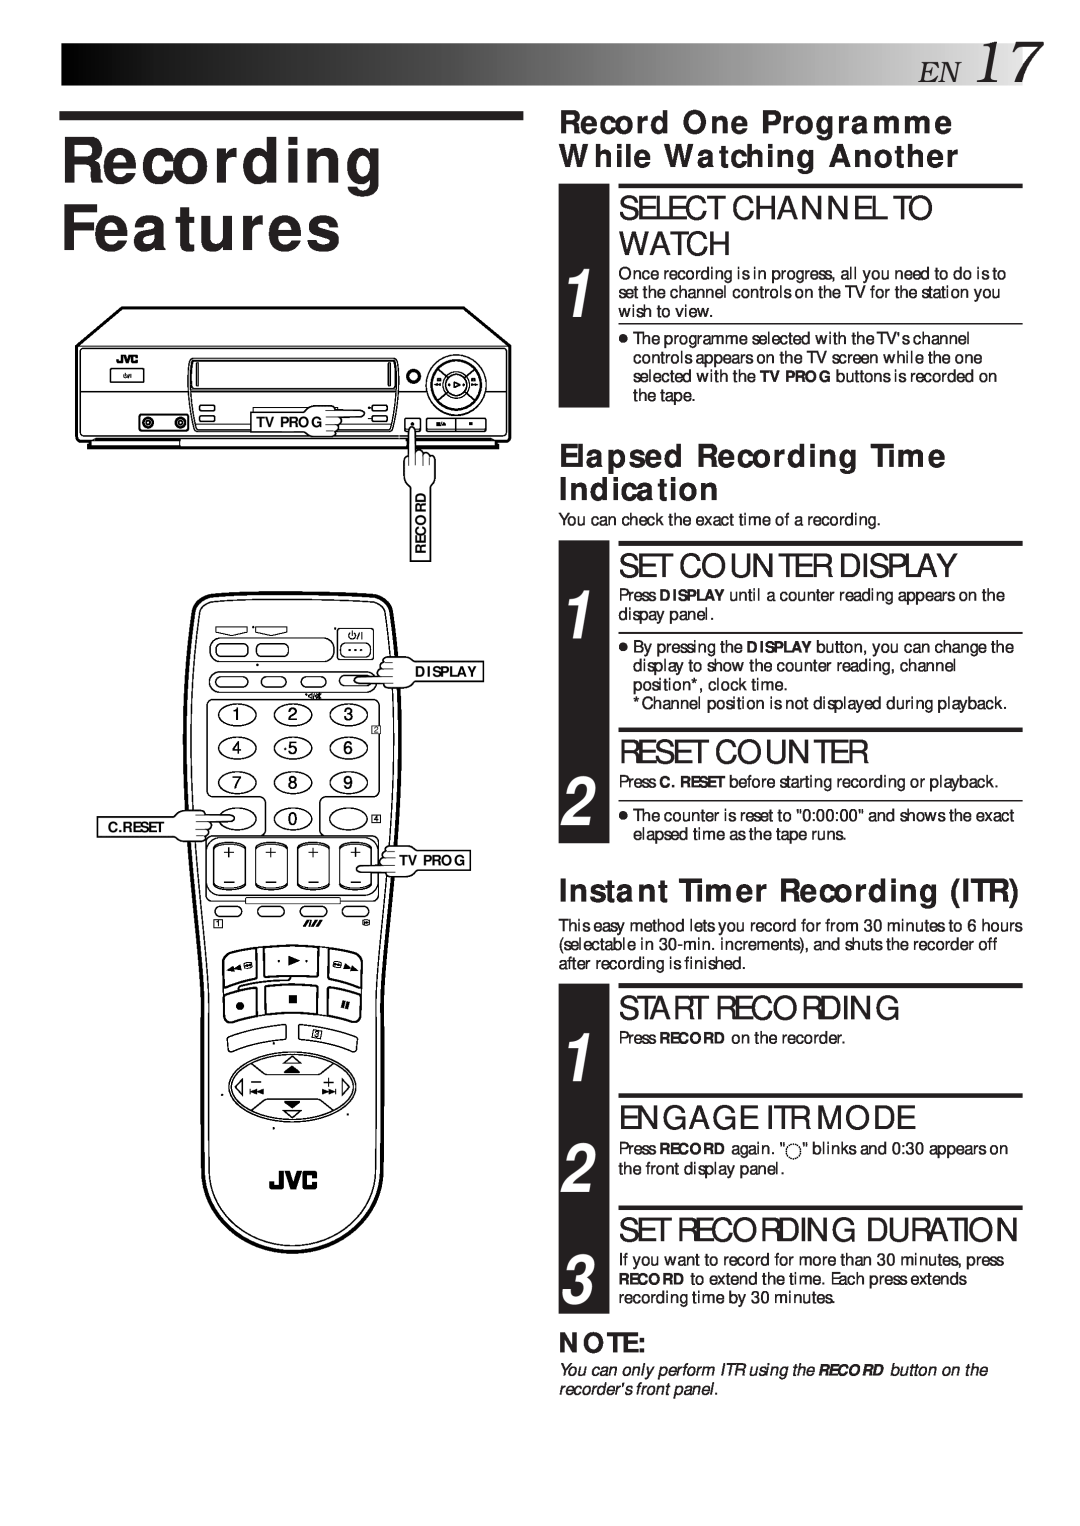 JVC HR-J461MS Recording Features, EN17, Select Channel To Watch, Set Counter Display, Reset Counter, Engage Itr Mode 